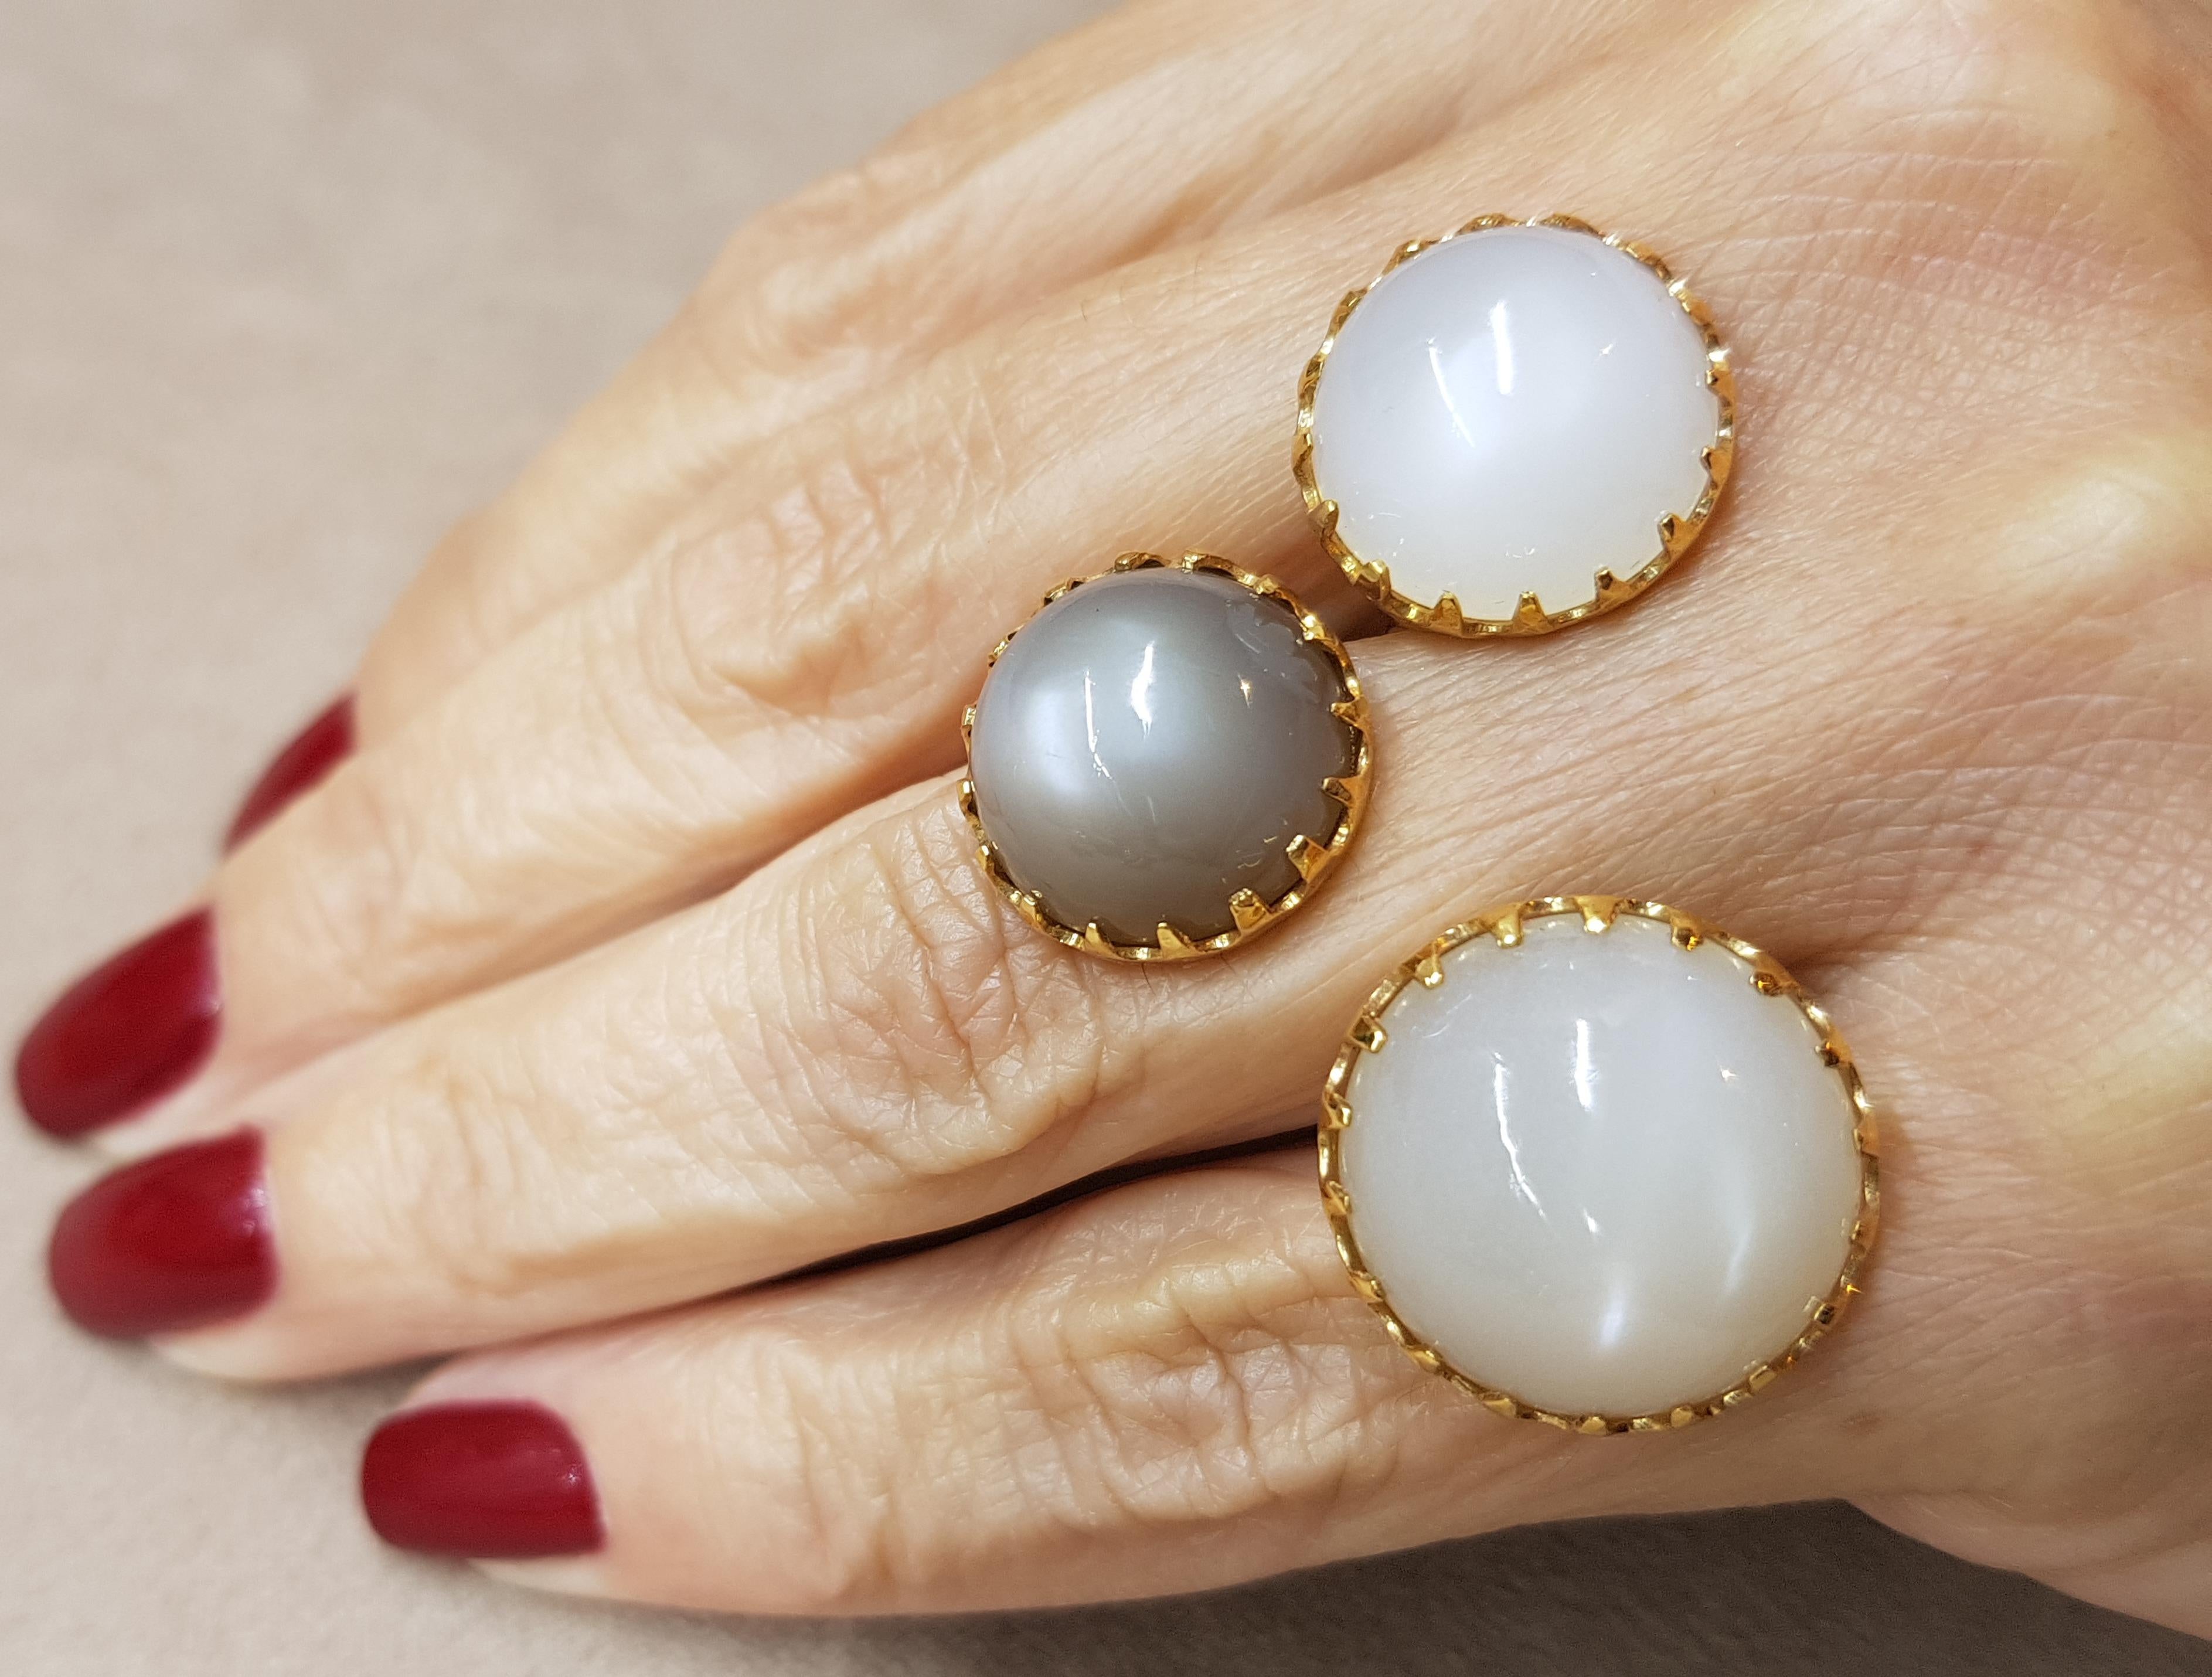 
Moonstone has been known for its calming,soothing qualities on the emotional body. Its energry is balancing and healing. To women,Moonstone reveals their feminine power and abilities of clairvoyance and gives to kundalini energy.

18 Karat Gold